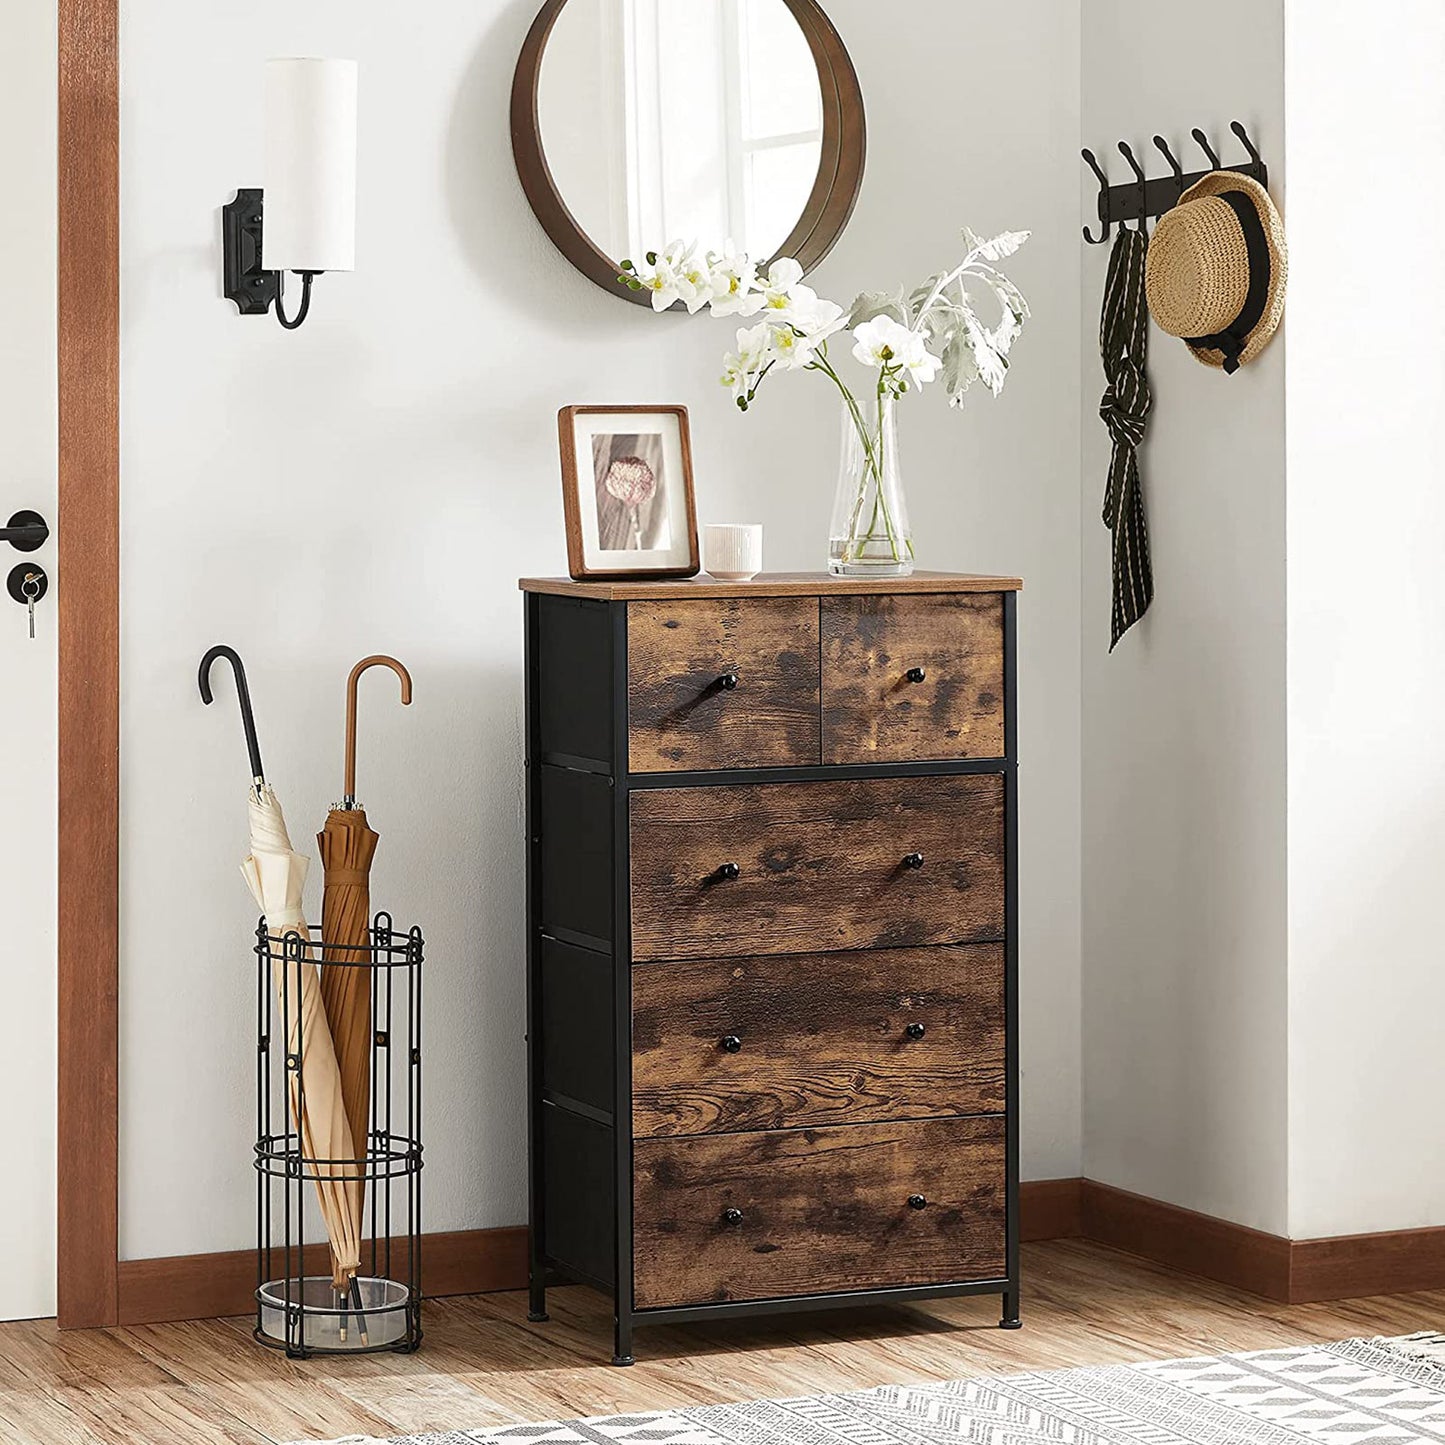 Chest of Drawers, Fabric 5-Drawer Storage Organiser Unit, Wooden Front and Top, Industrial Style Dresser Unit, SONGMICS, 2